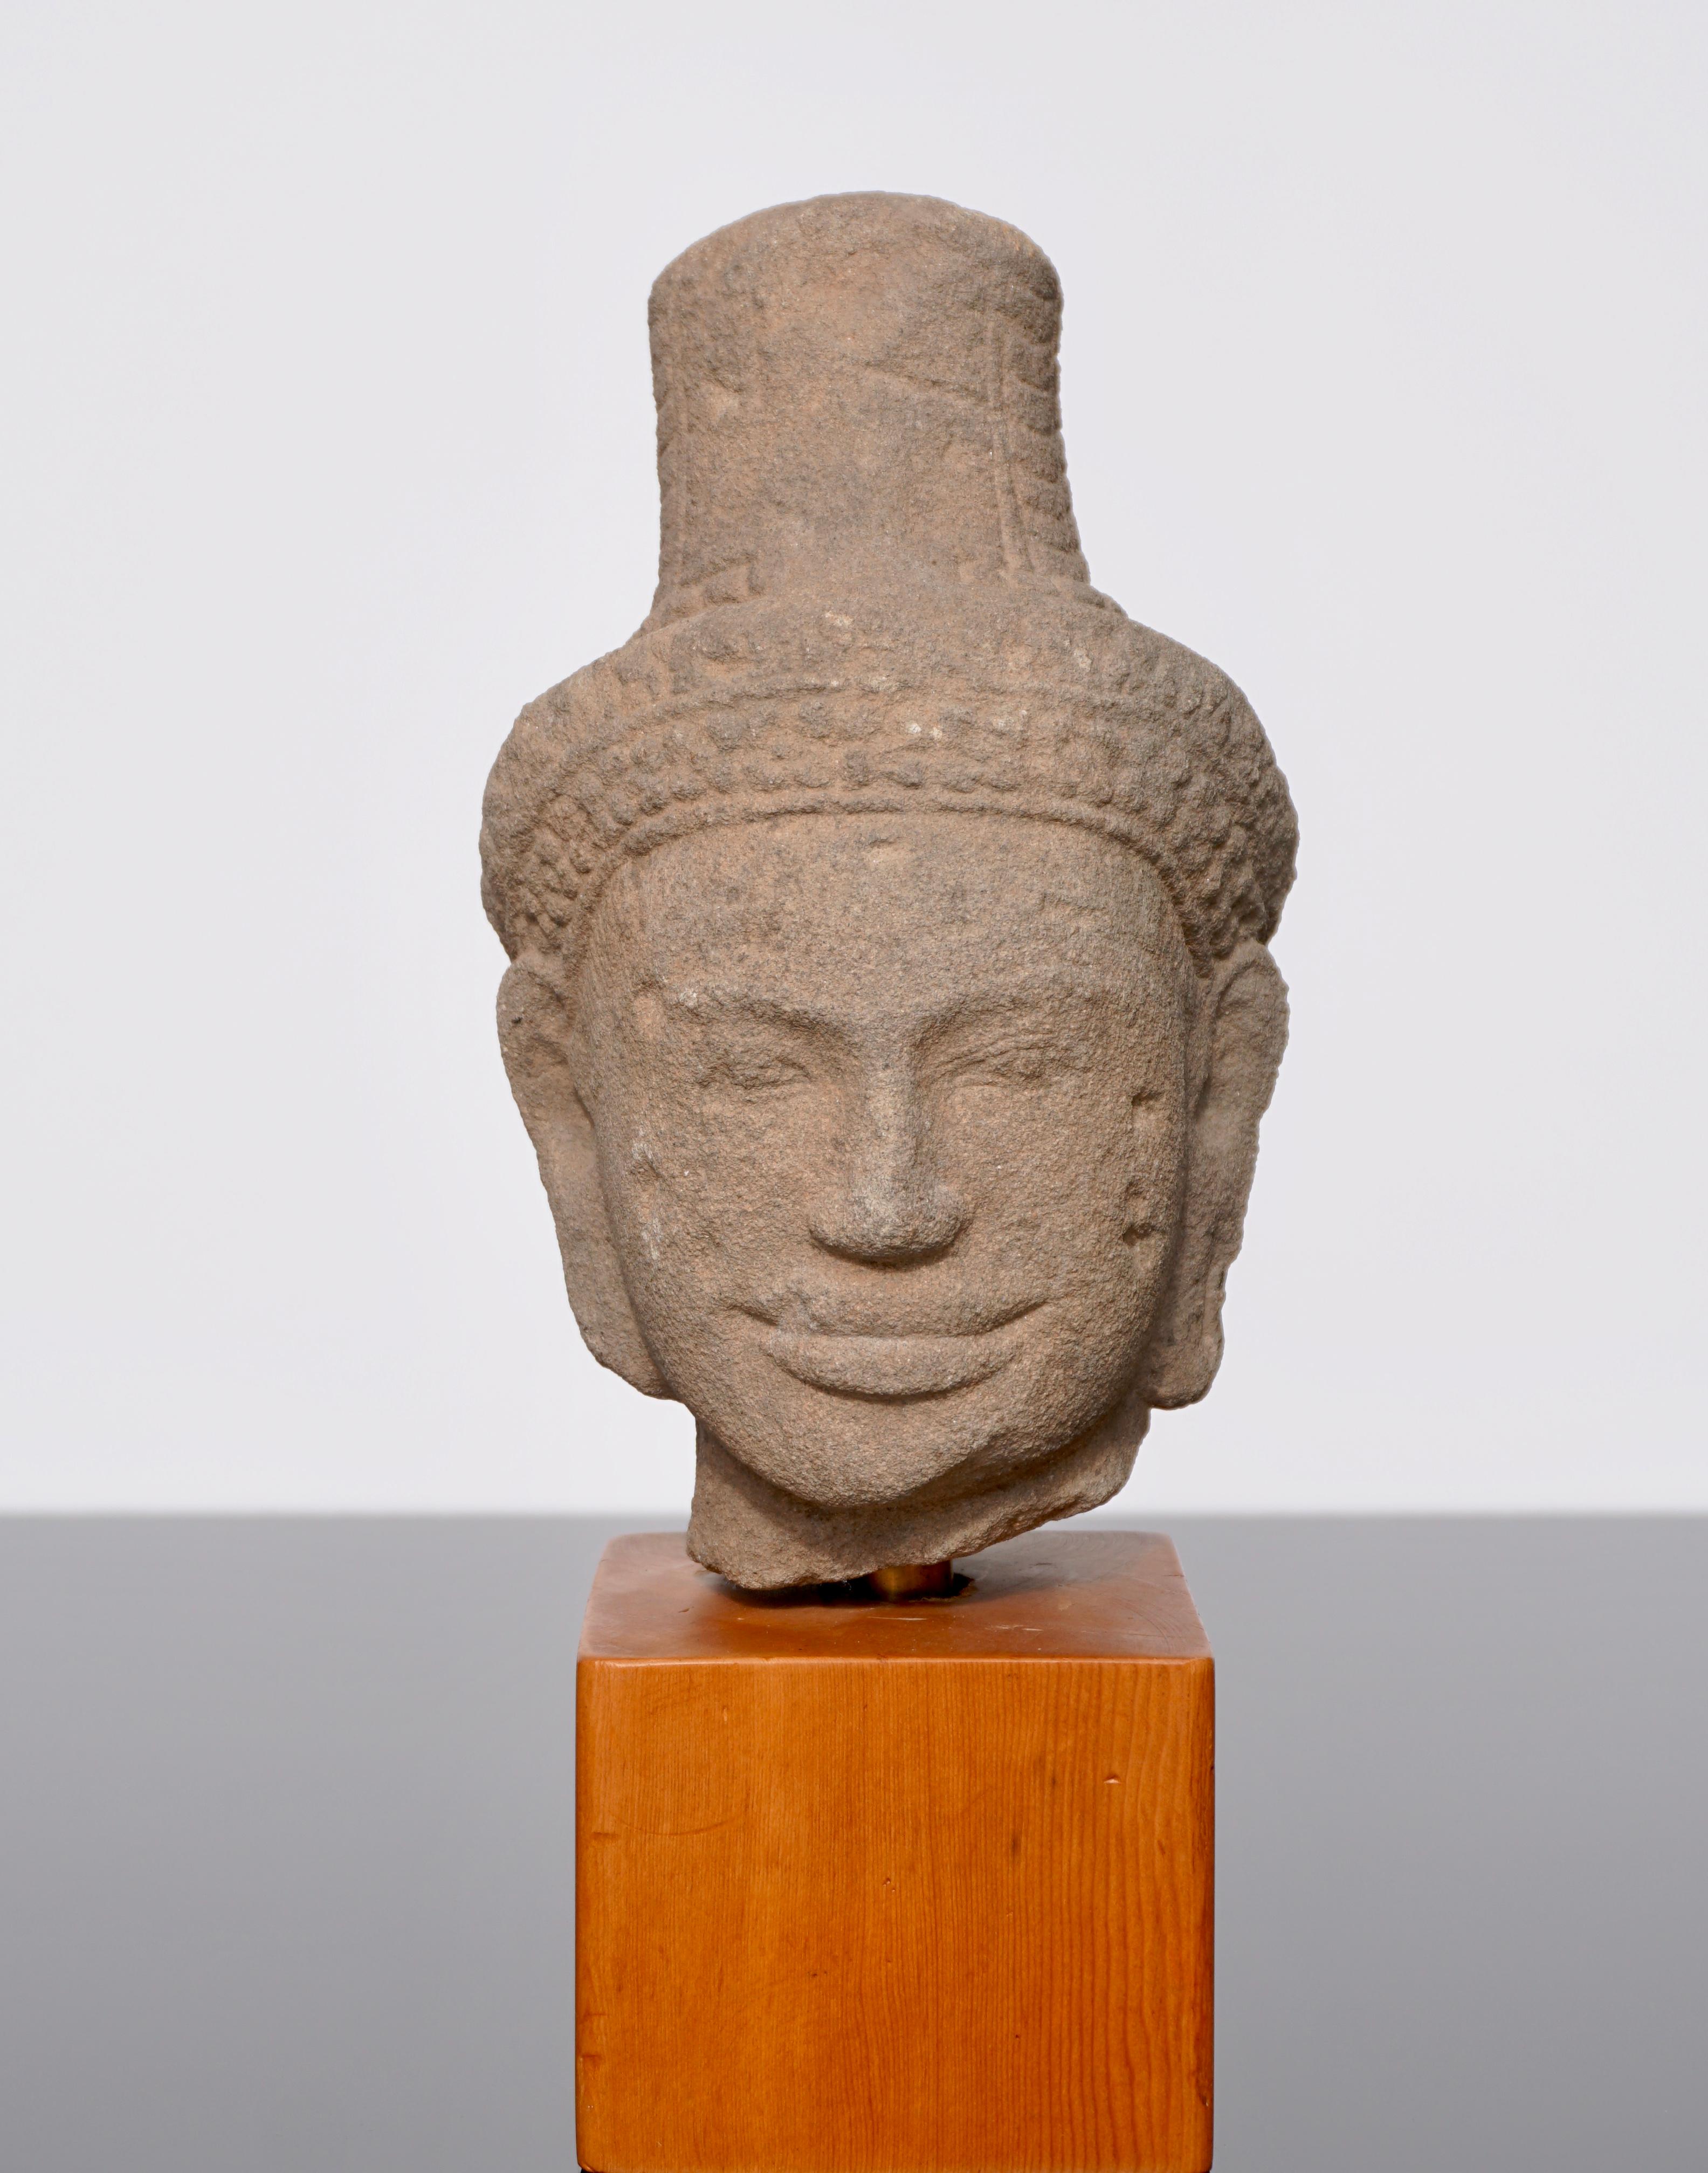 A sandstone figure head of Shiva 
Khmer, Baphuon style, circa 11th century. 
A rare Khmer gray sandstone head of Shiva.

The handsome head of the divinity deity Shiva.

His face with serene expression, almond-shaped eyes, ridged eyebrows and